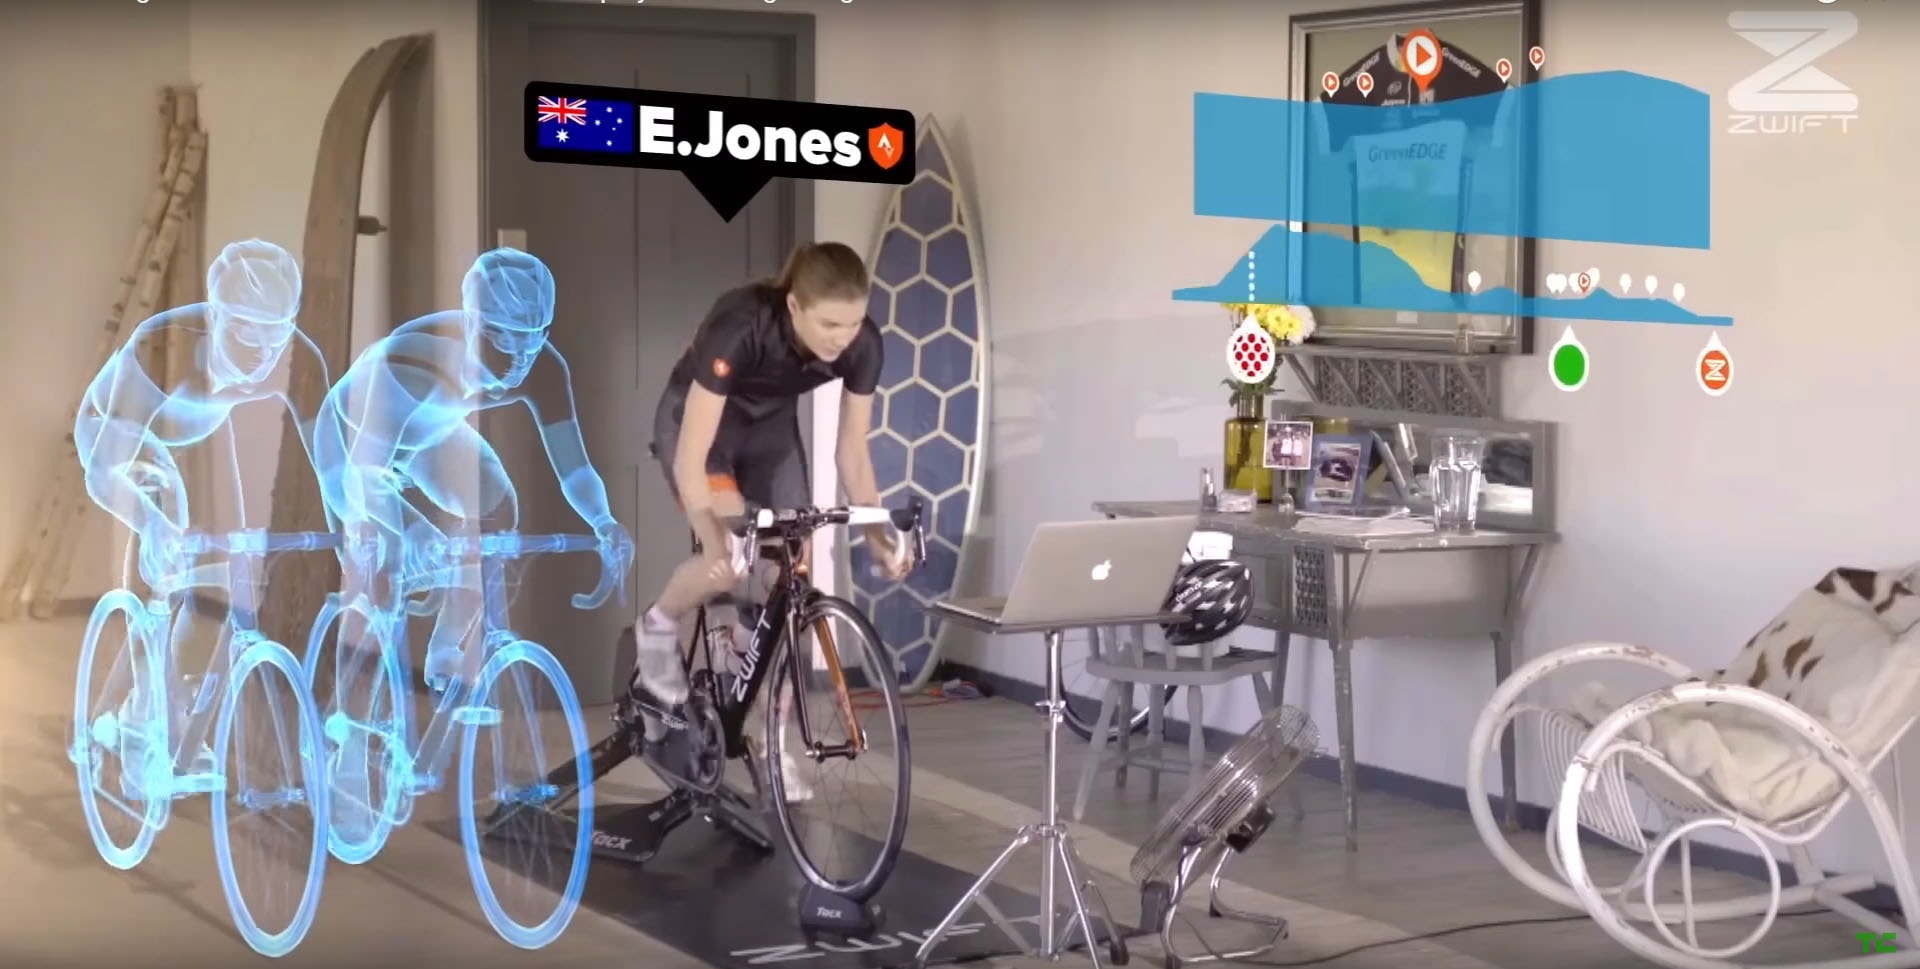 Zwift Is a Massive Multi-Player Online Game You Play with Your